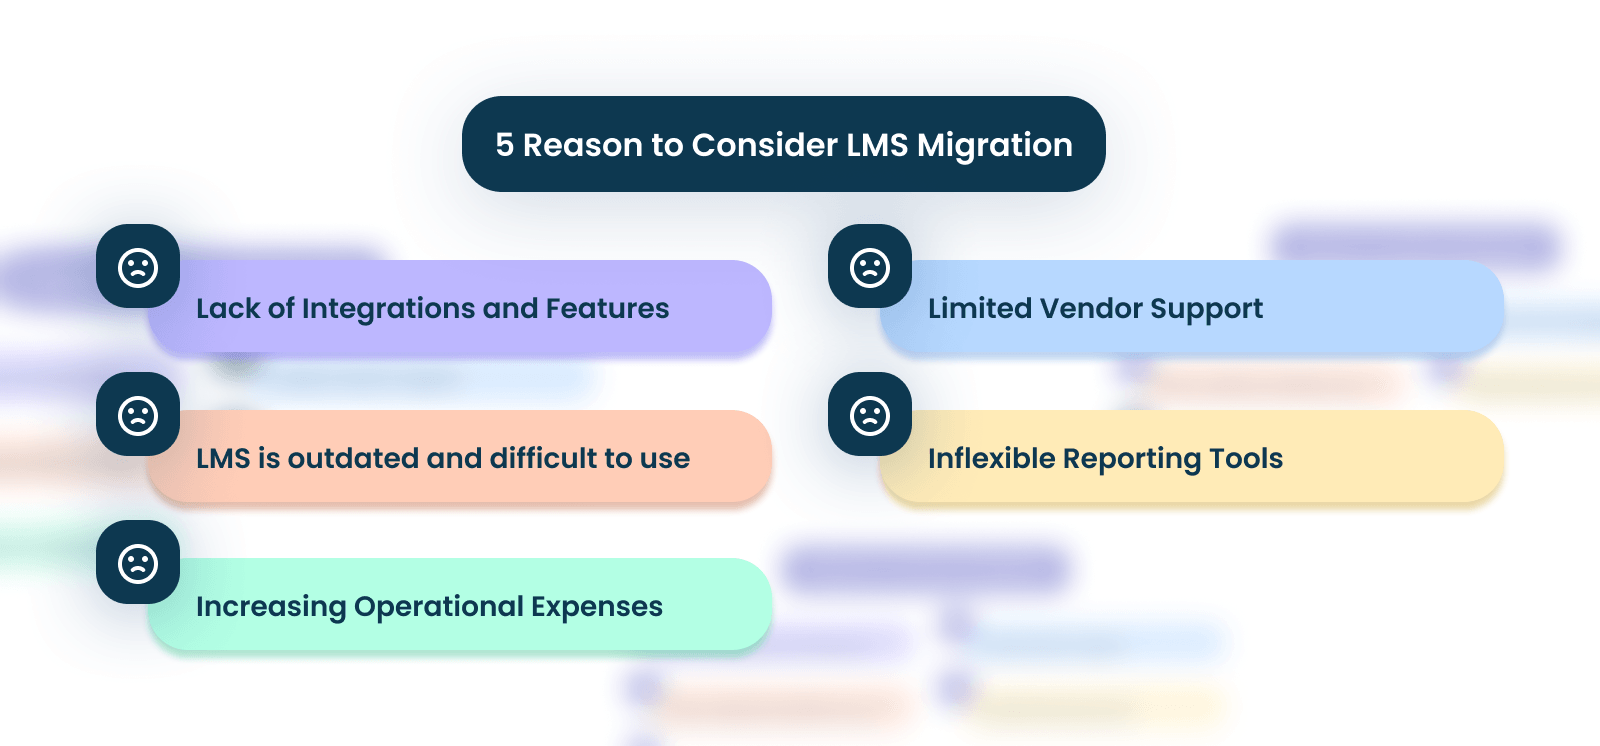 Switching LMS platforms? Follow these best practices for migrating courses, data, and users to your new learning platform.